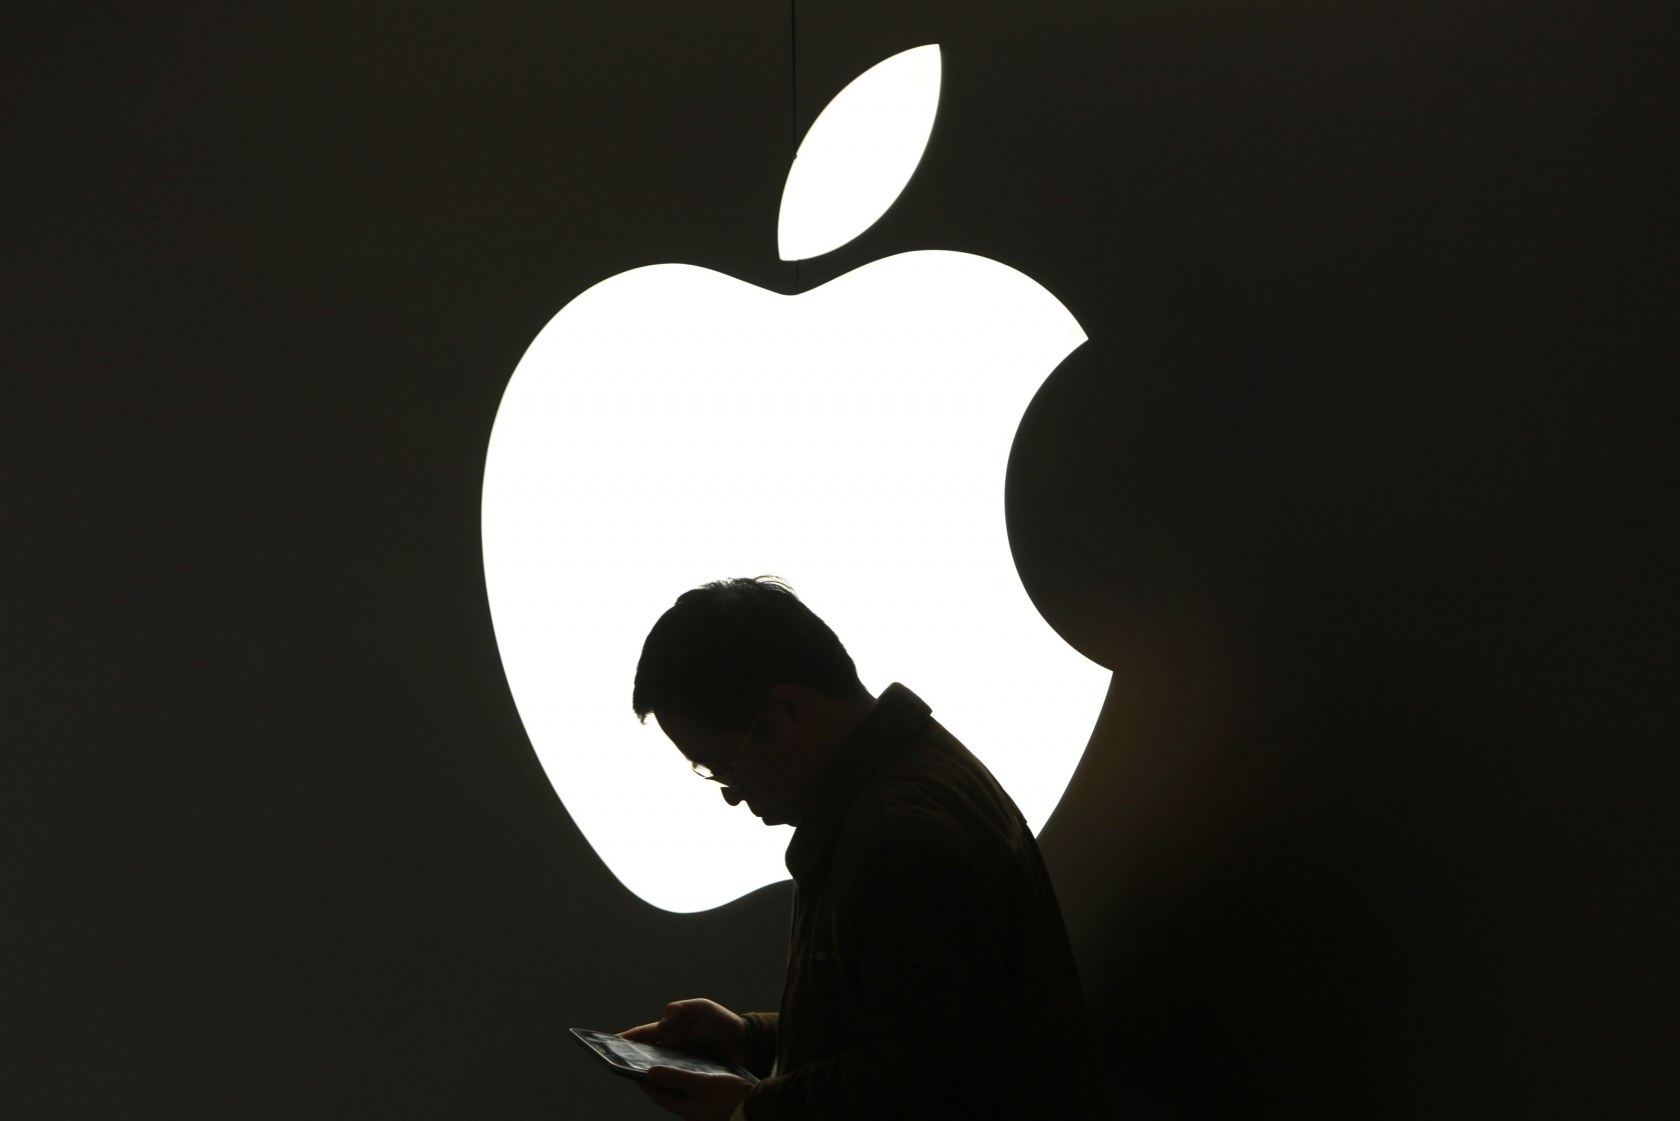 Man pleads guilty to hacking Apple accounts of famous musicians and athletes